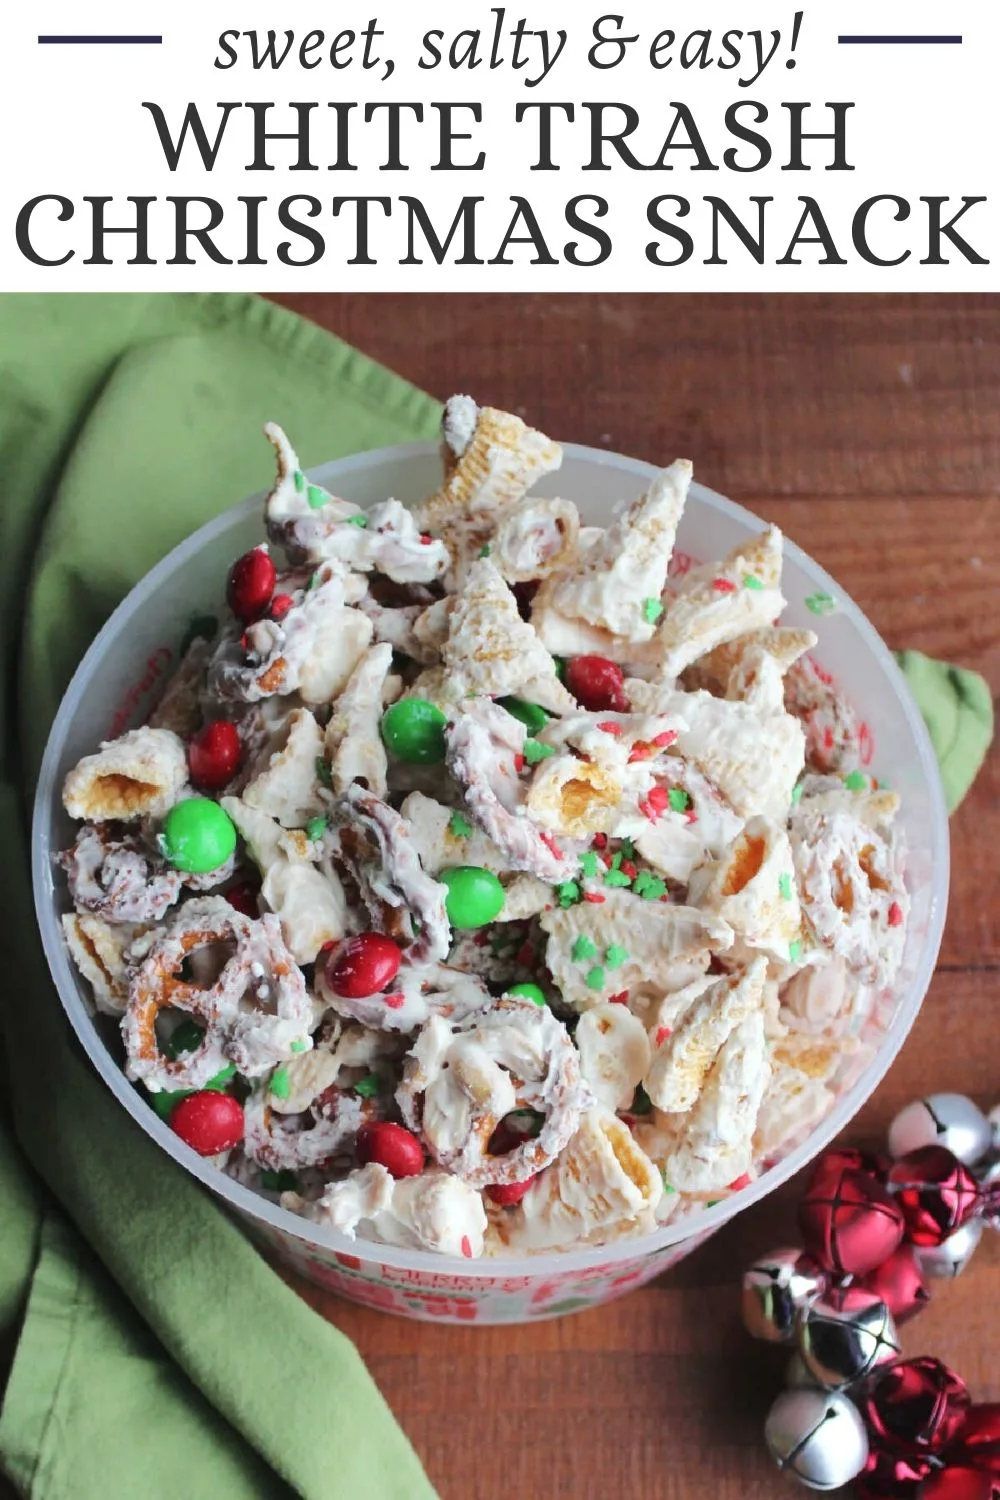 White trash snack mix is a sweet and salty snack mix that only takes a few minutes to make and the results are delicious. This version is decked out in red and green for the merriest of white trash goodness, but the colors could easily be changed for any occasion.